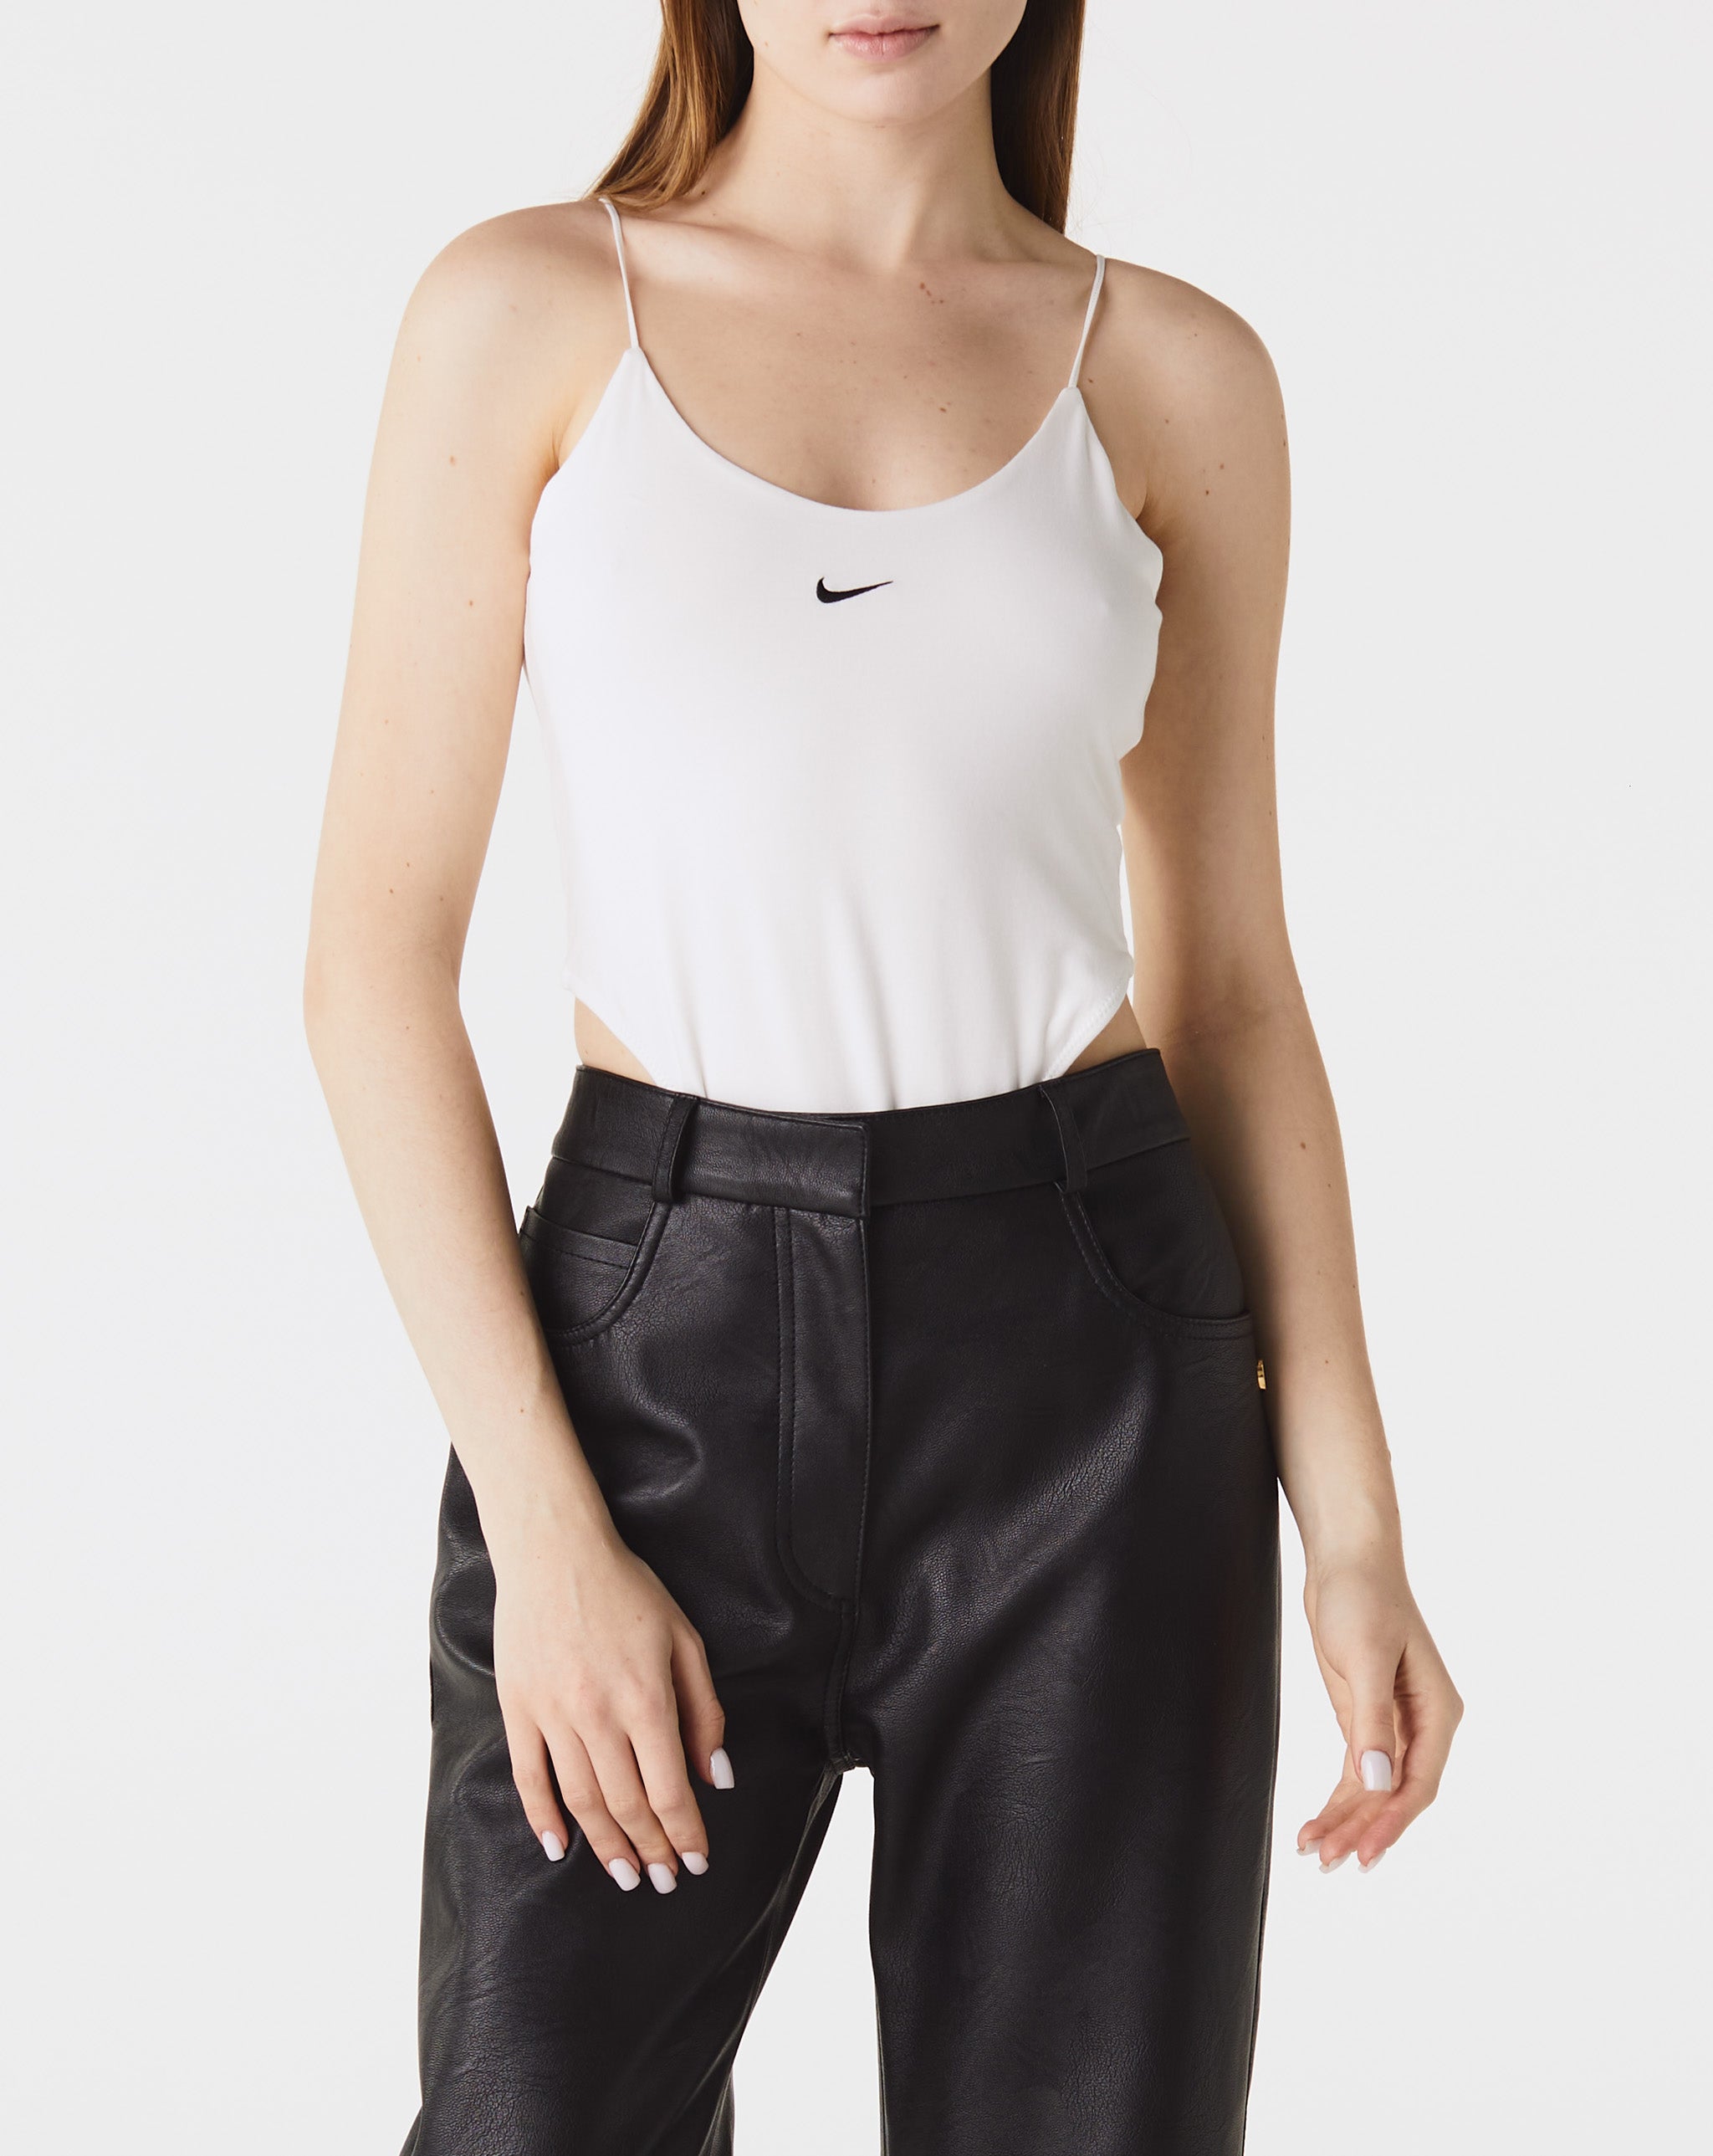 Nike Our smooth jersey is stretchy with a slight drape, making it perfect for everyday wear  - Cheap Urlfreeze Jordan outlet